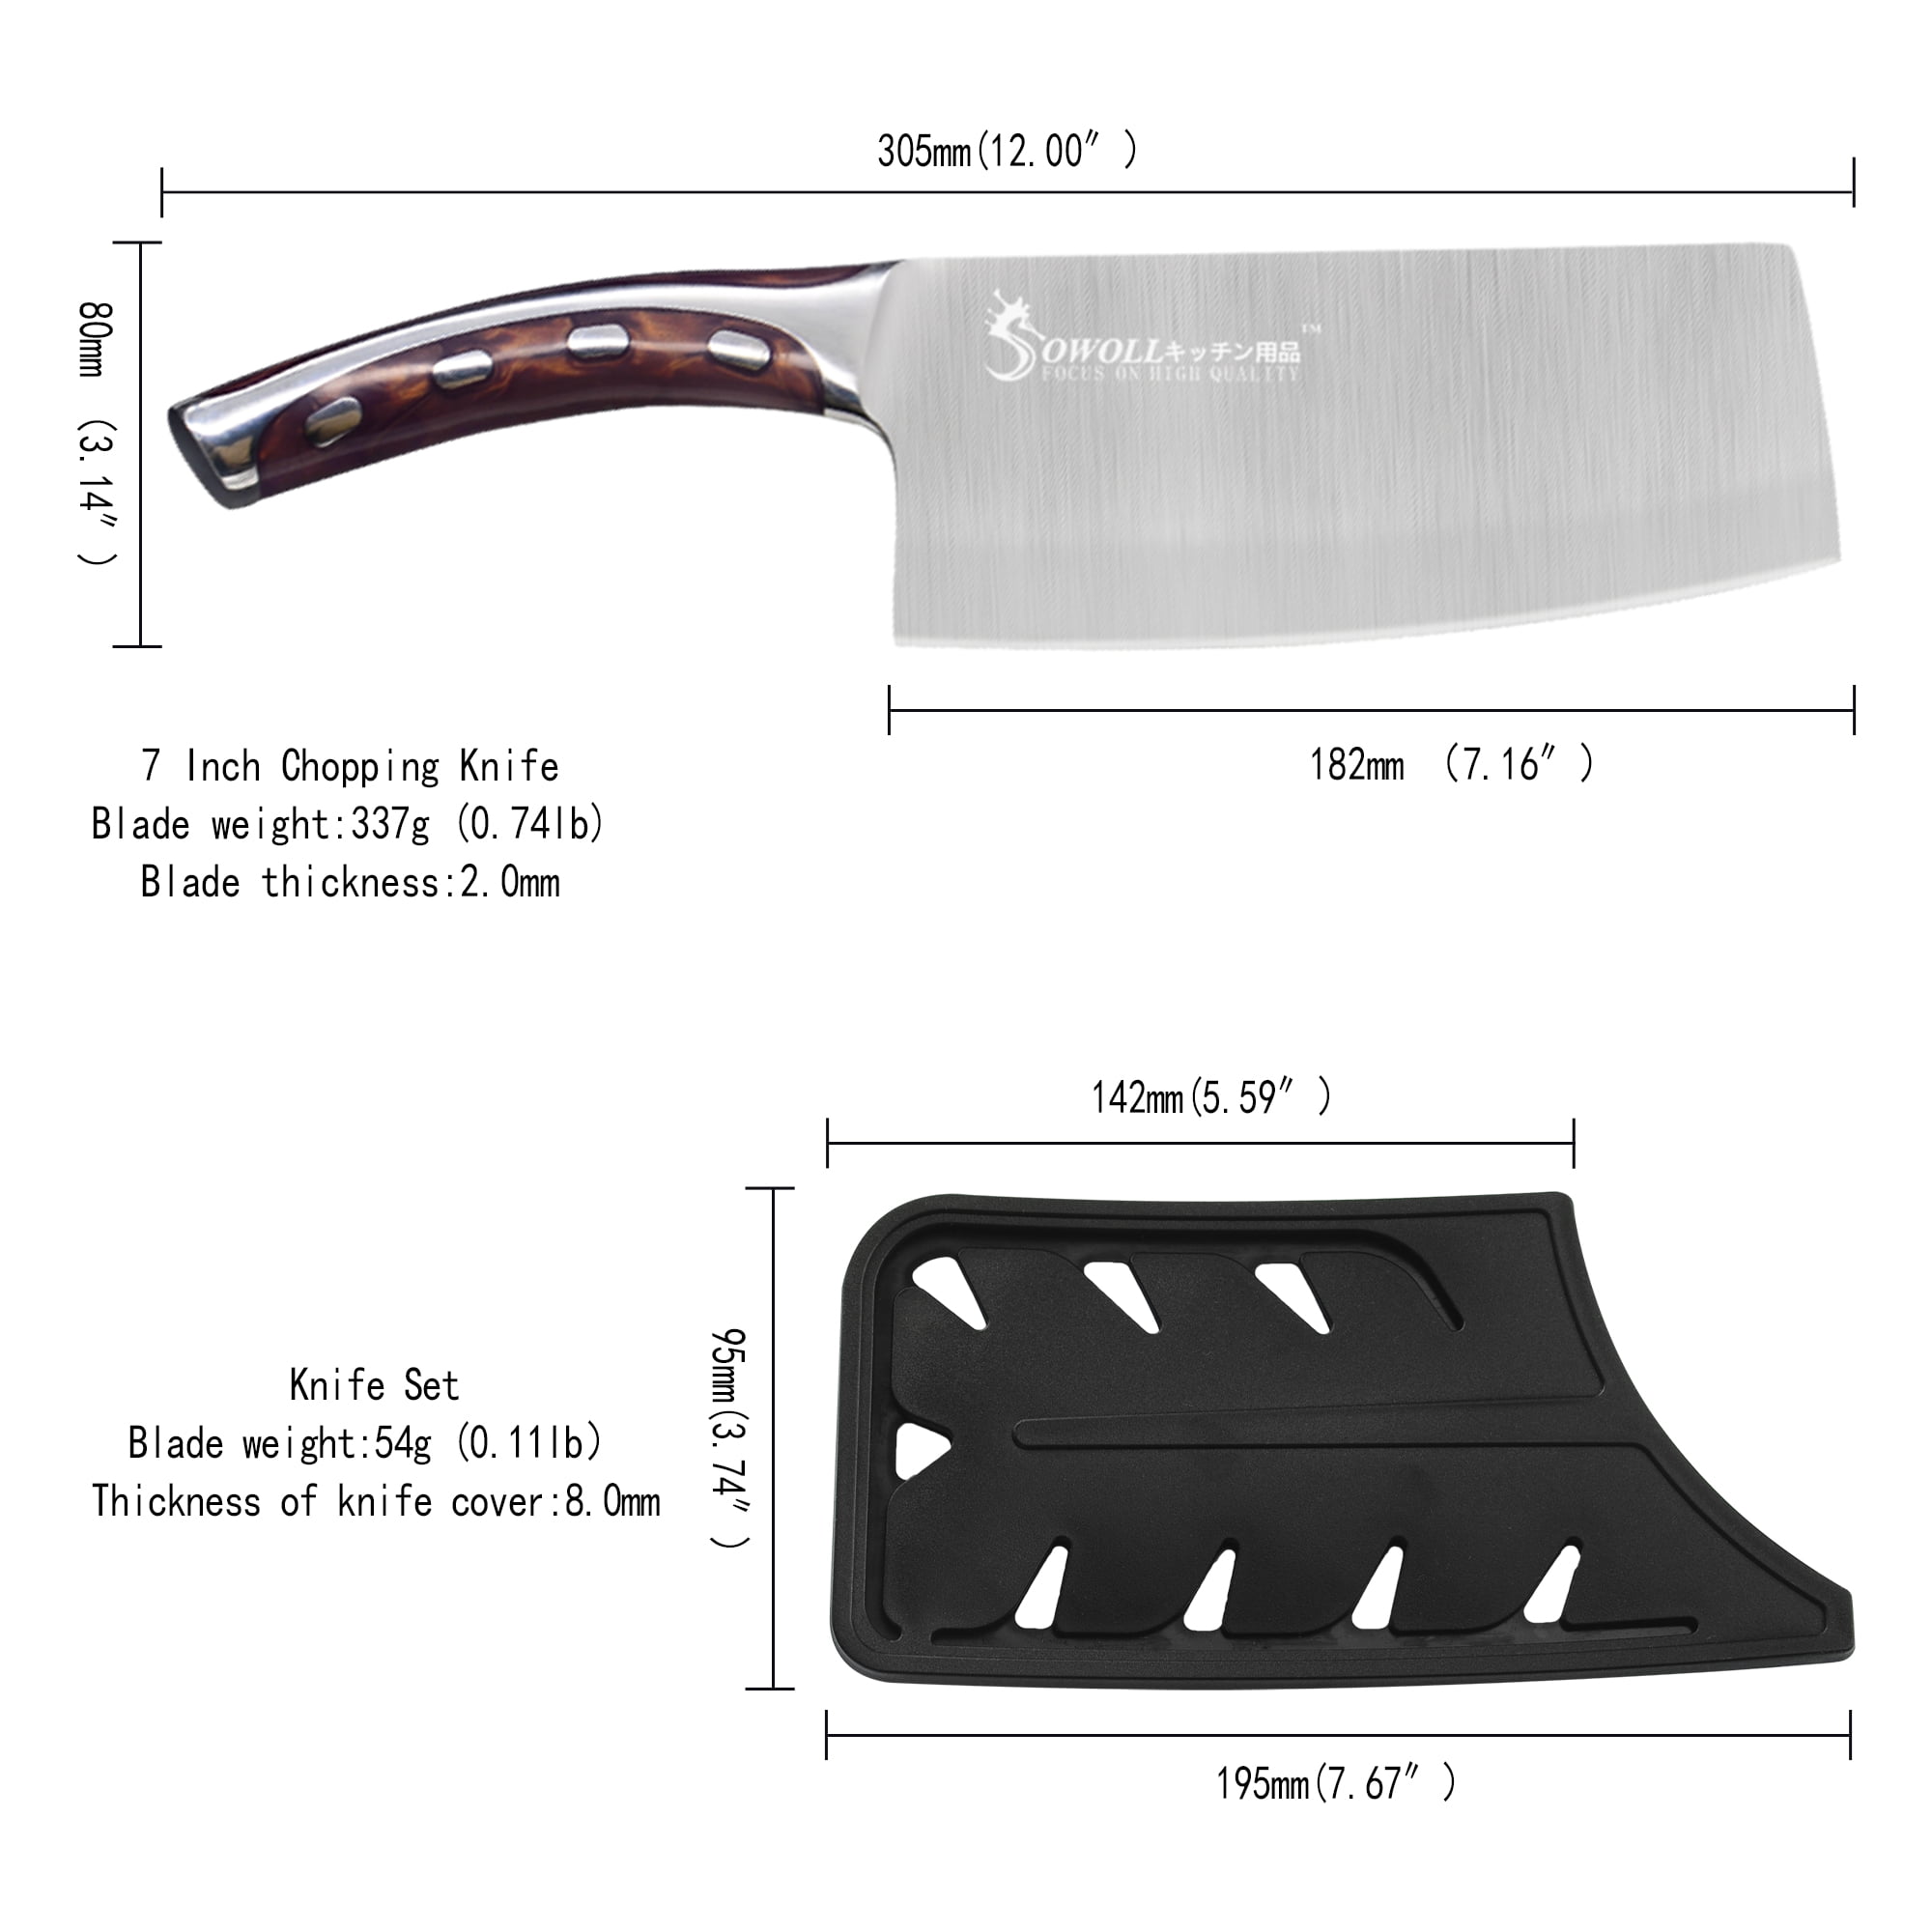 Sunrise Stainless Steel Veggie/Meat/Poultry Cleaver with Black Rubber Handle 6.85 L x 3.5 W 